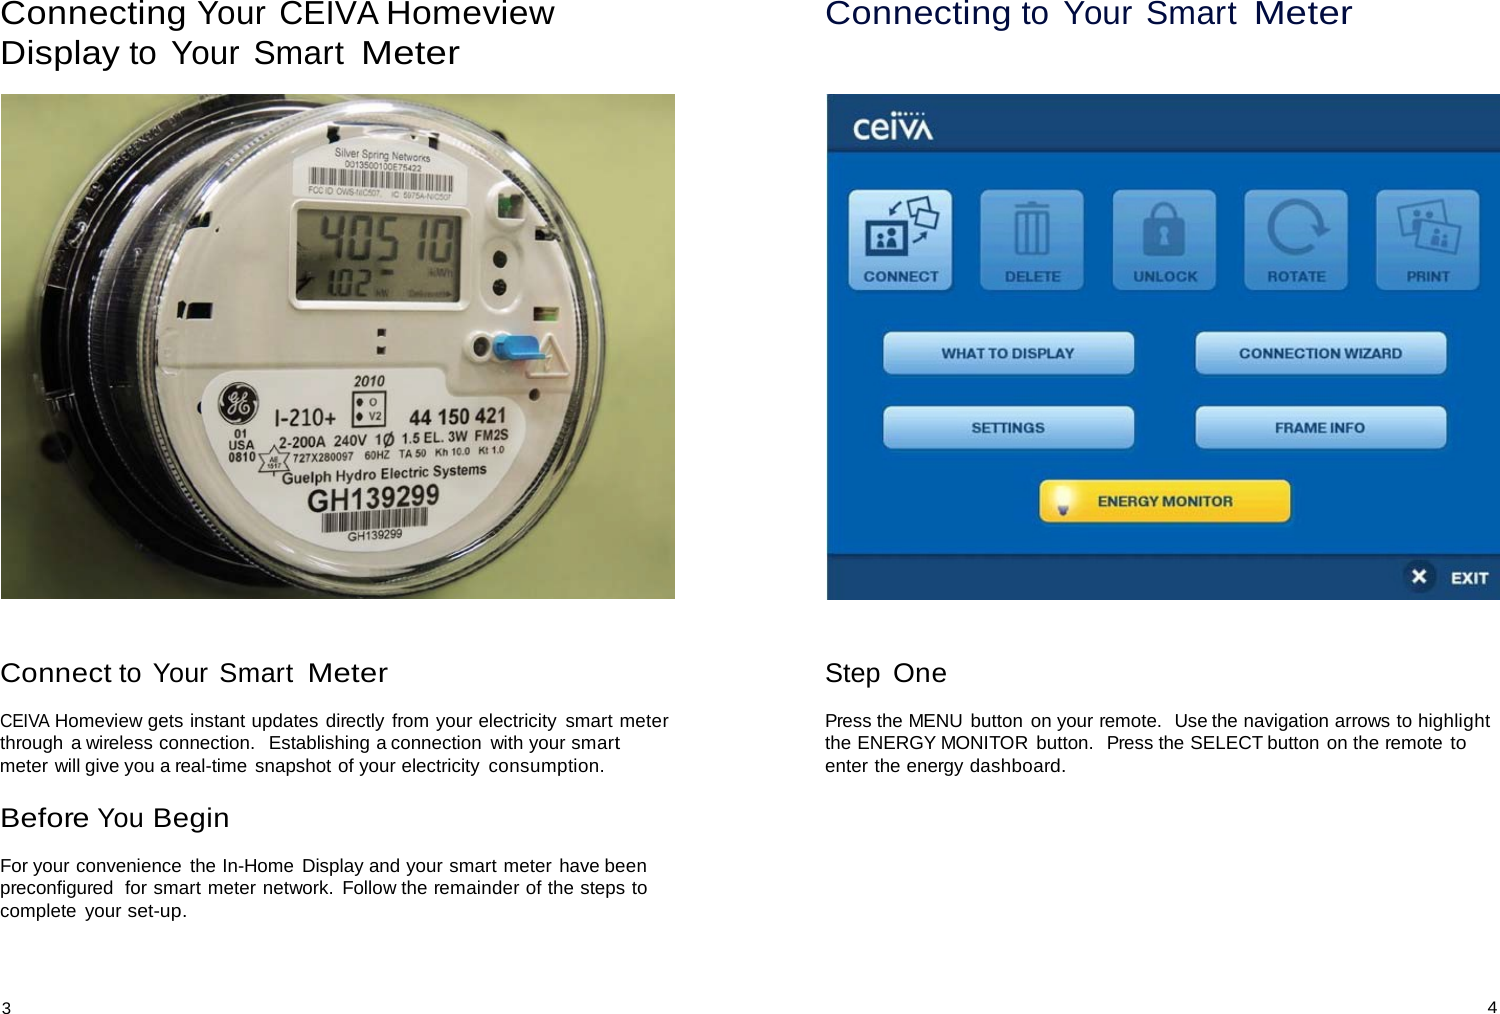  Connecting Your CEIVA Homeview Display to Your Smart Meter      Connect to Your Smart Meter  CEIVA Homeview gets instant updates directly from your electricity  smart meter through  a wireless connection.   Establishing a connection  with your smart meter will give you a real-time snapshot of your electricity  consumption.  Before You Begin  For your convenience  the In-Home  Display and your smart meter have been preconfigured  for smart meter network.  Follow the remainder of the steps to complete  your set-up. Connecting to Your Smart Meter        Step One  Press the MENU button on your remote.  Use the navigation arrows to highlight the ENERGY MONITOR button.  Press the SELECT button on the remote to enter the energy dashboard.    3 4 